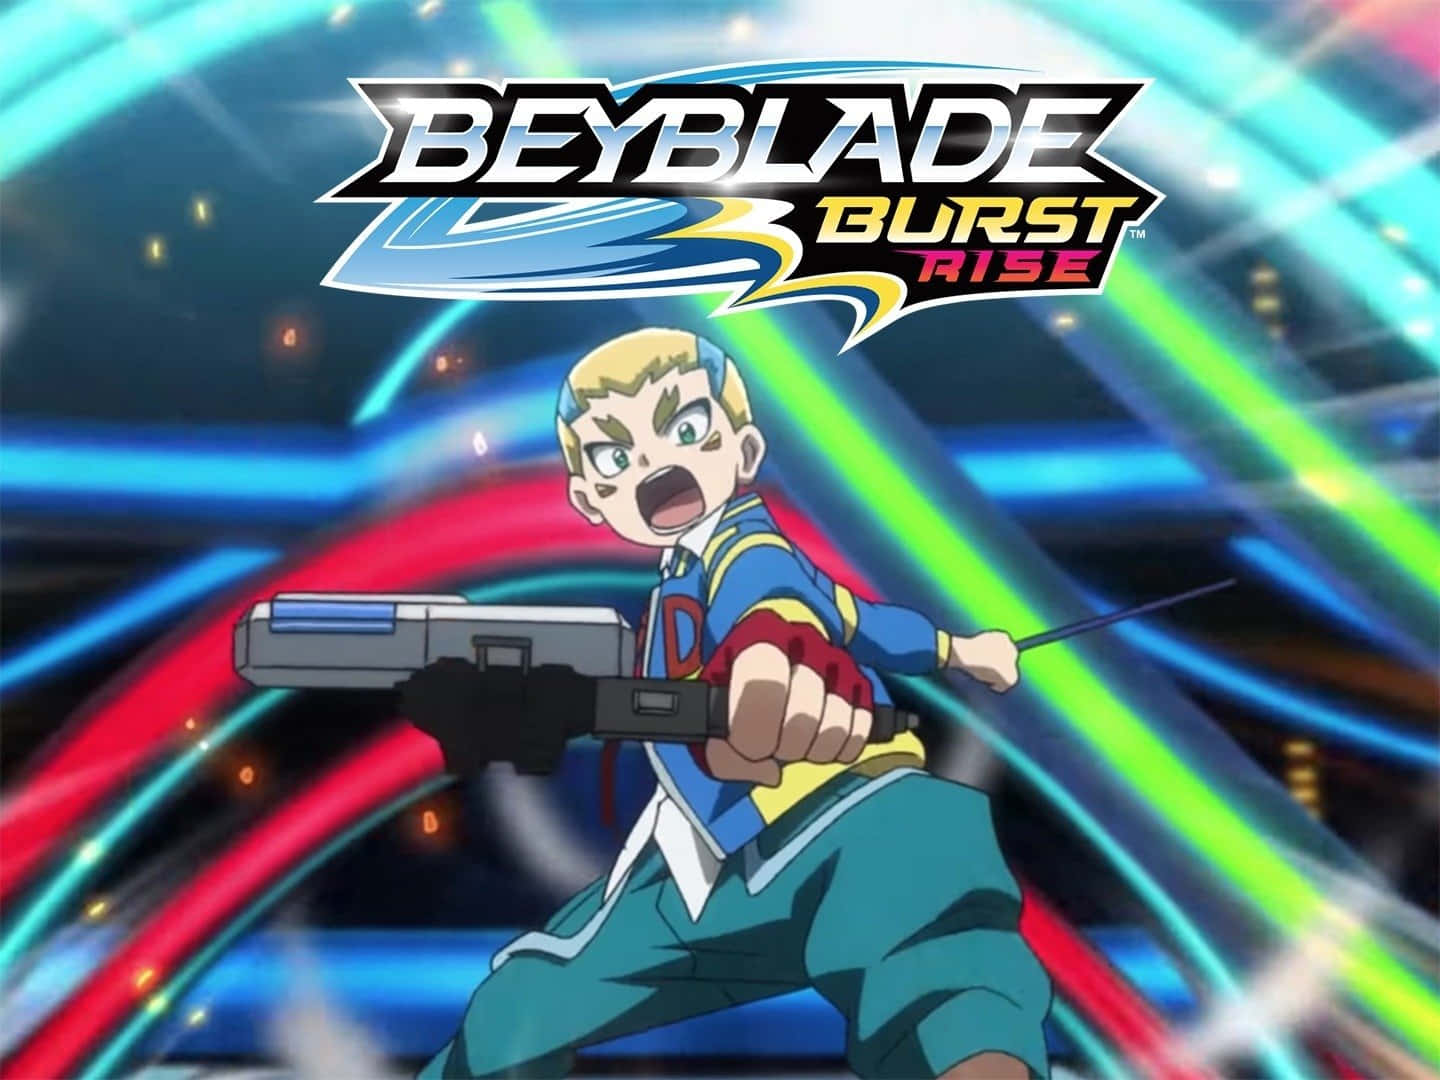 Spin your way to victory with Beyblade Burst!